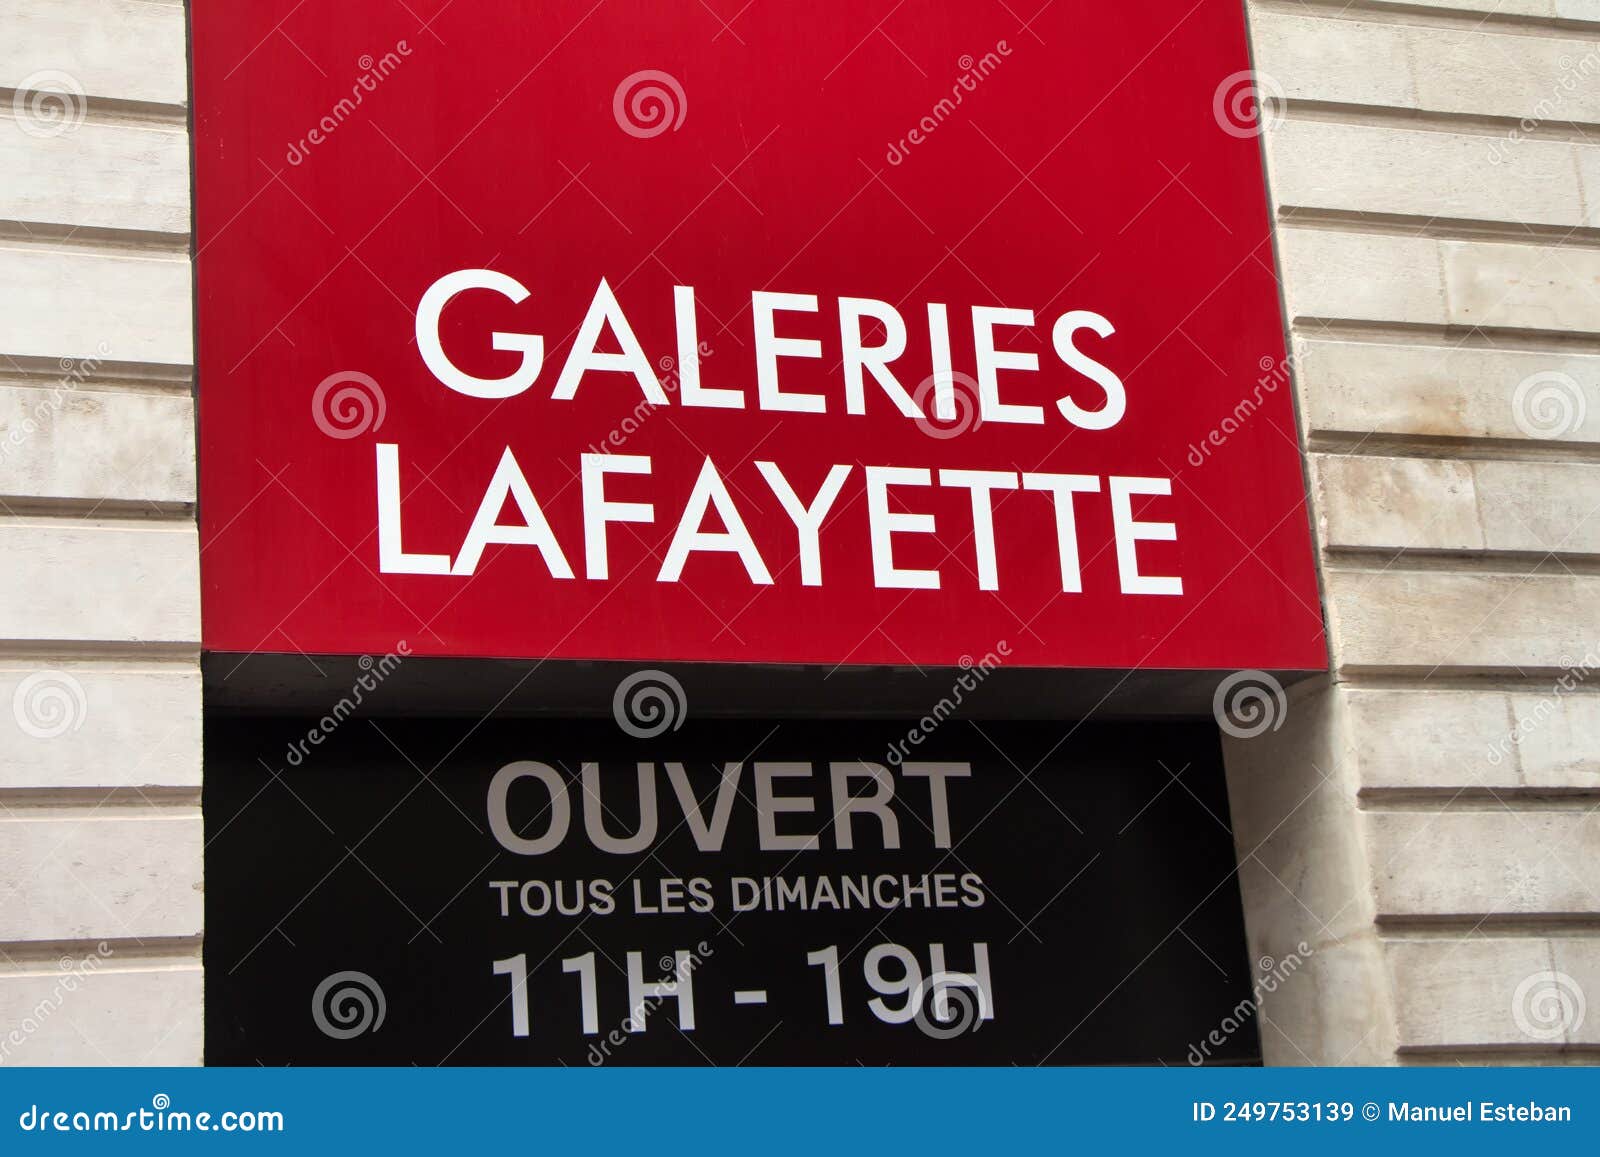 Galeries Lafayette Logo on Galeries Lafayette Store Editorial Stock ...